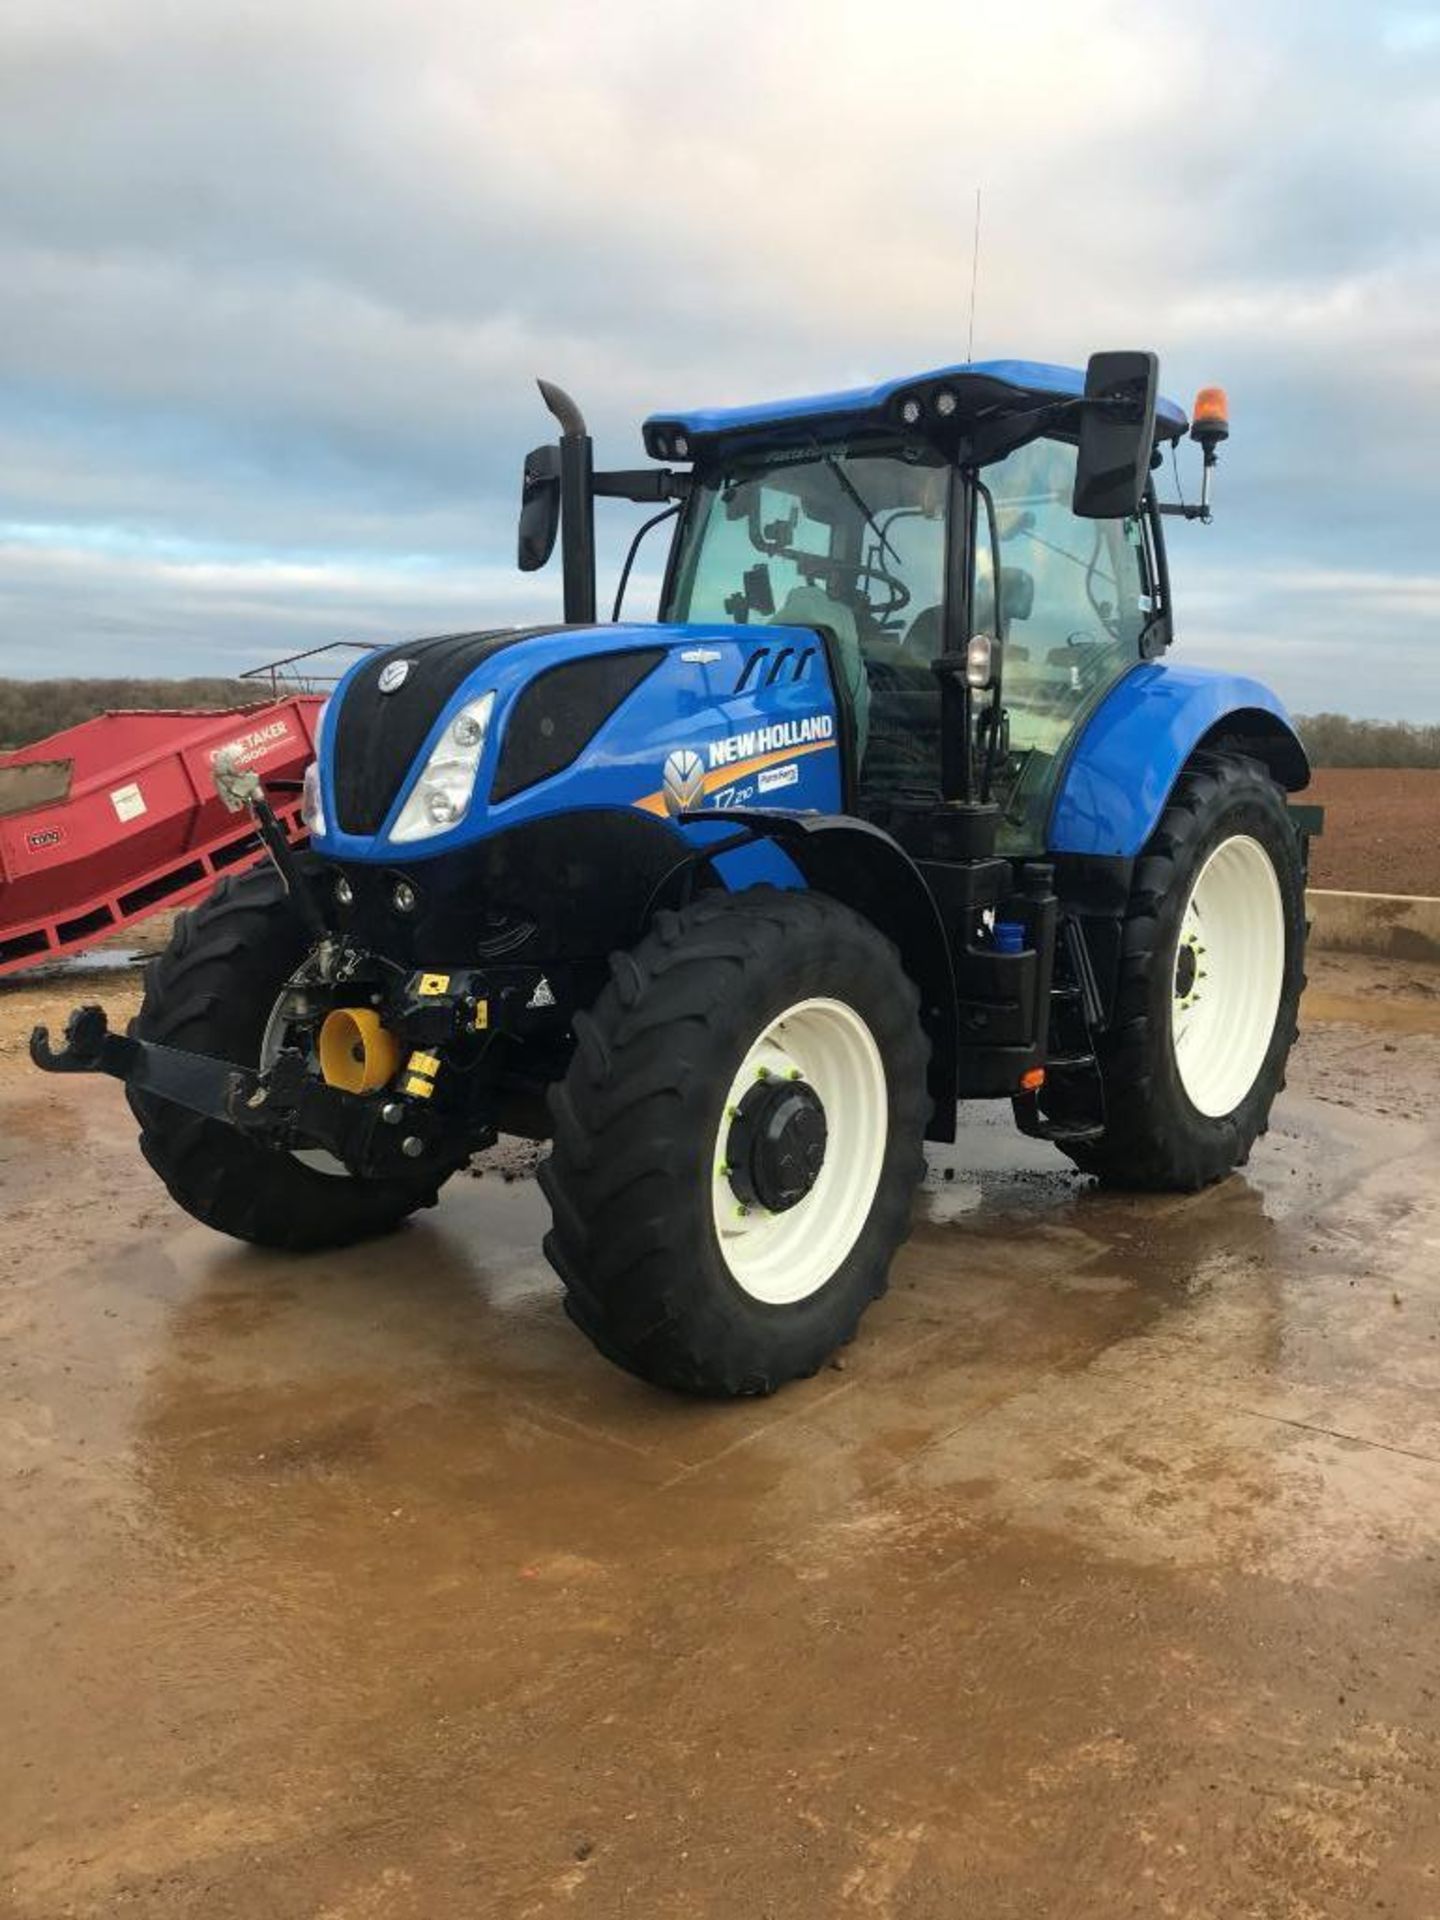 2019 New Holland T7.210 4wd Auto Command 50Kph tractor with front linkage and PTO, 4 electric spools - Image 2 of 18